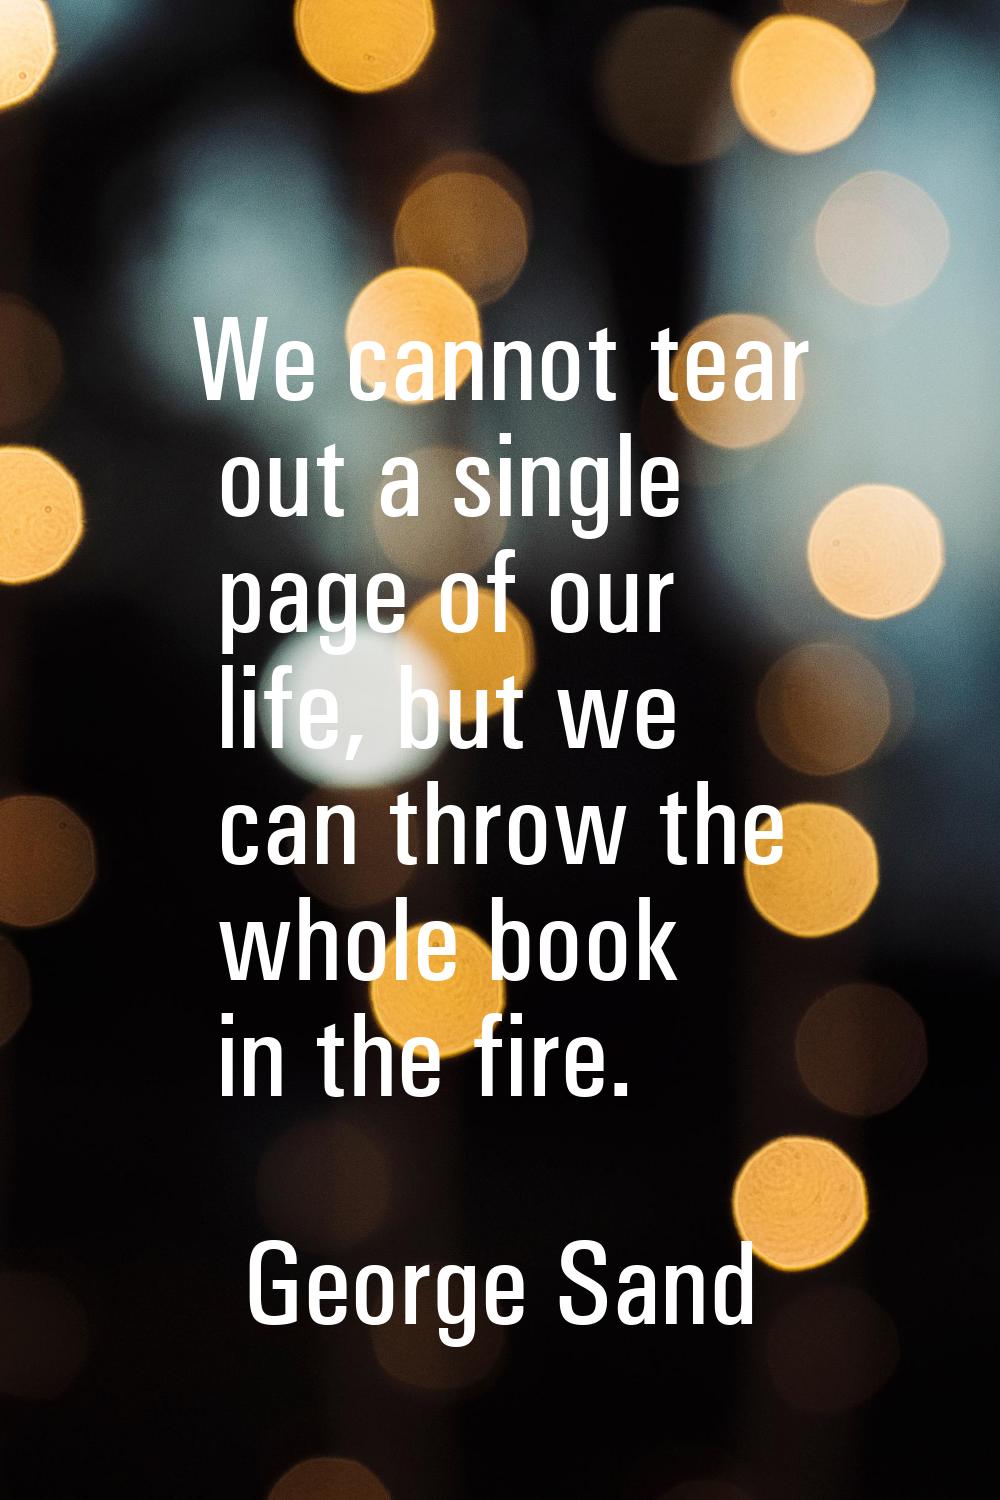 We cannot tear out a single page of our life, but we can throw the whole book in the fire.